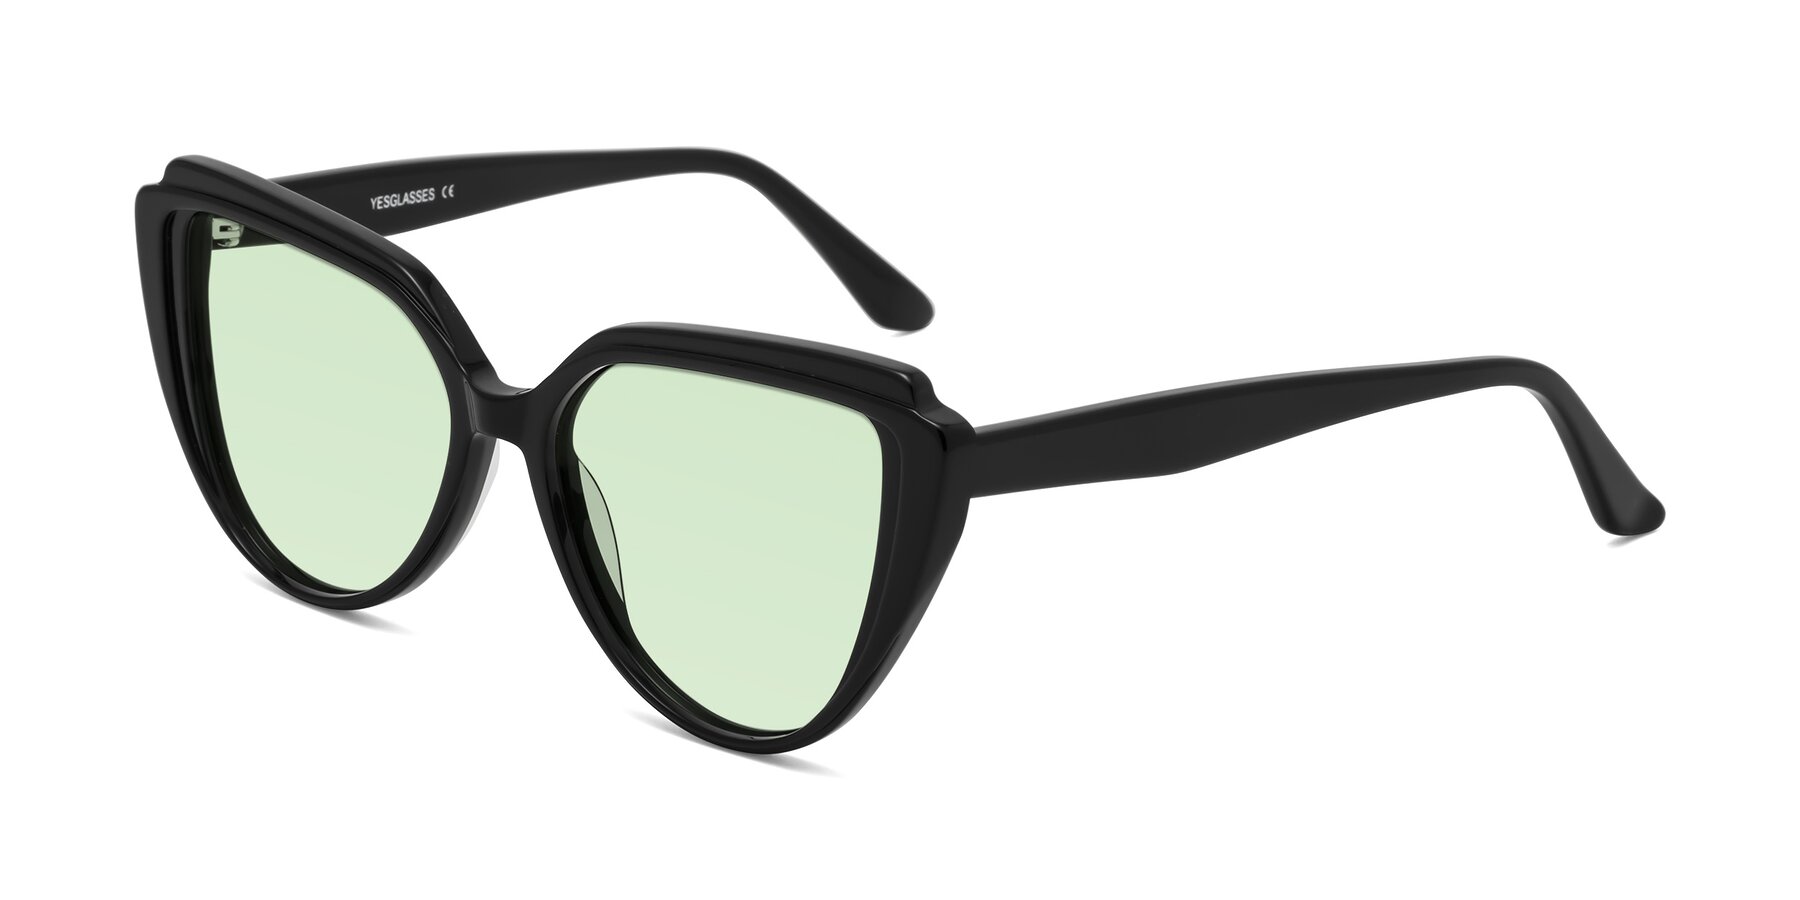 Angle of Zubar in Black with Light Green Tinted Lenses